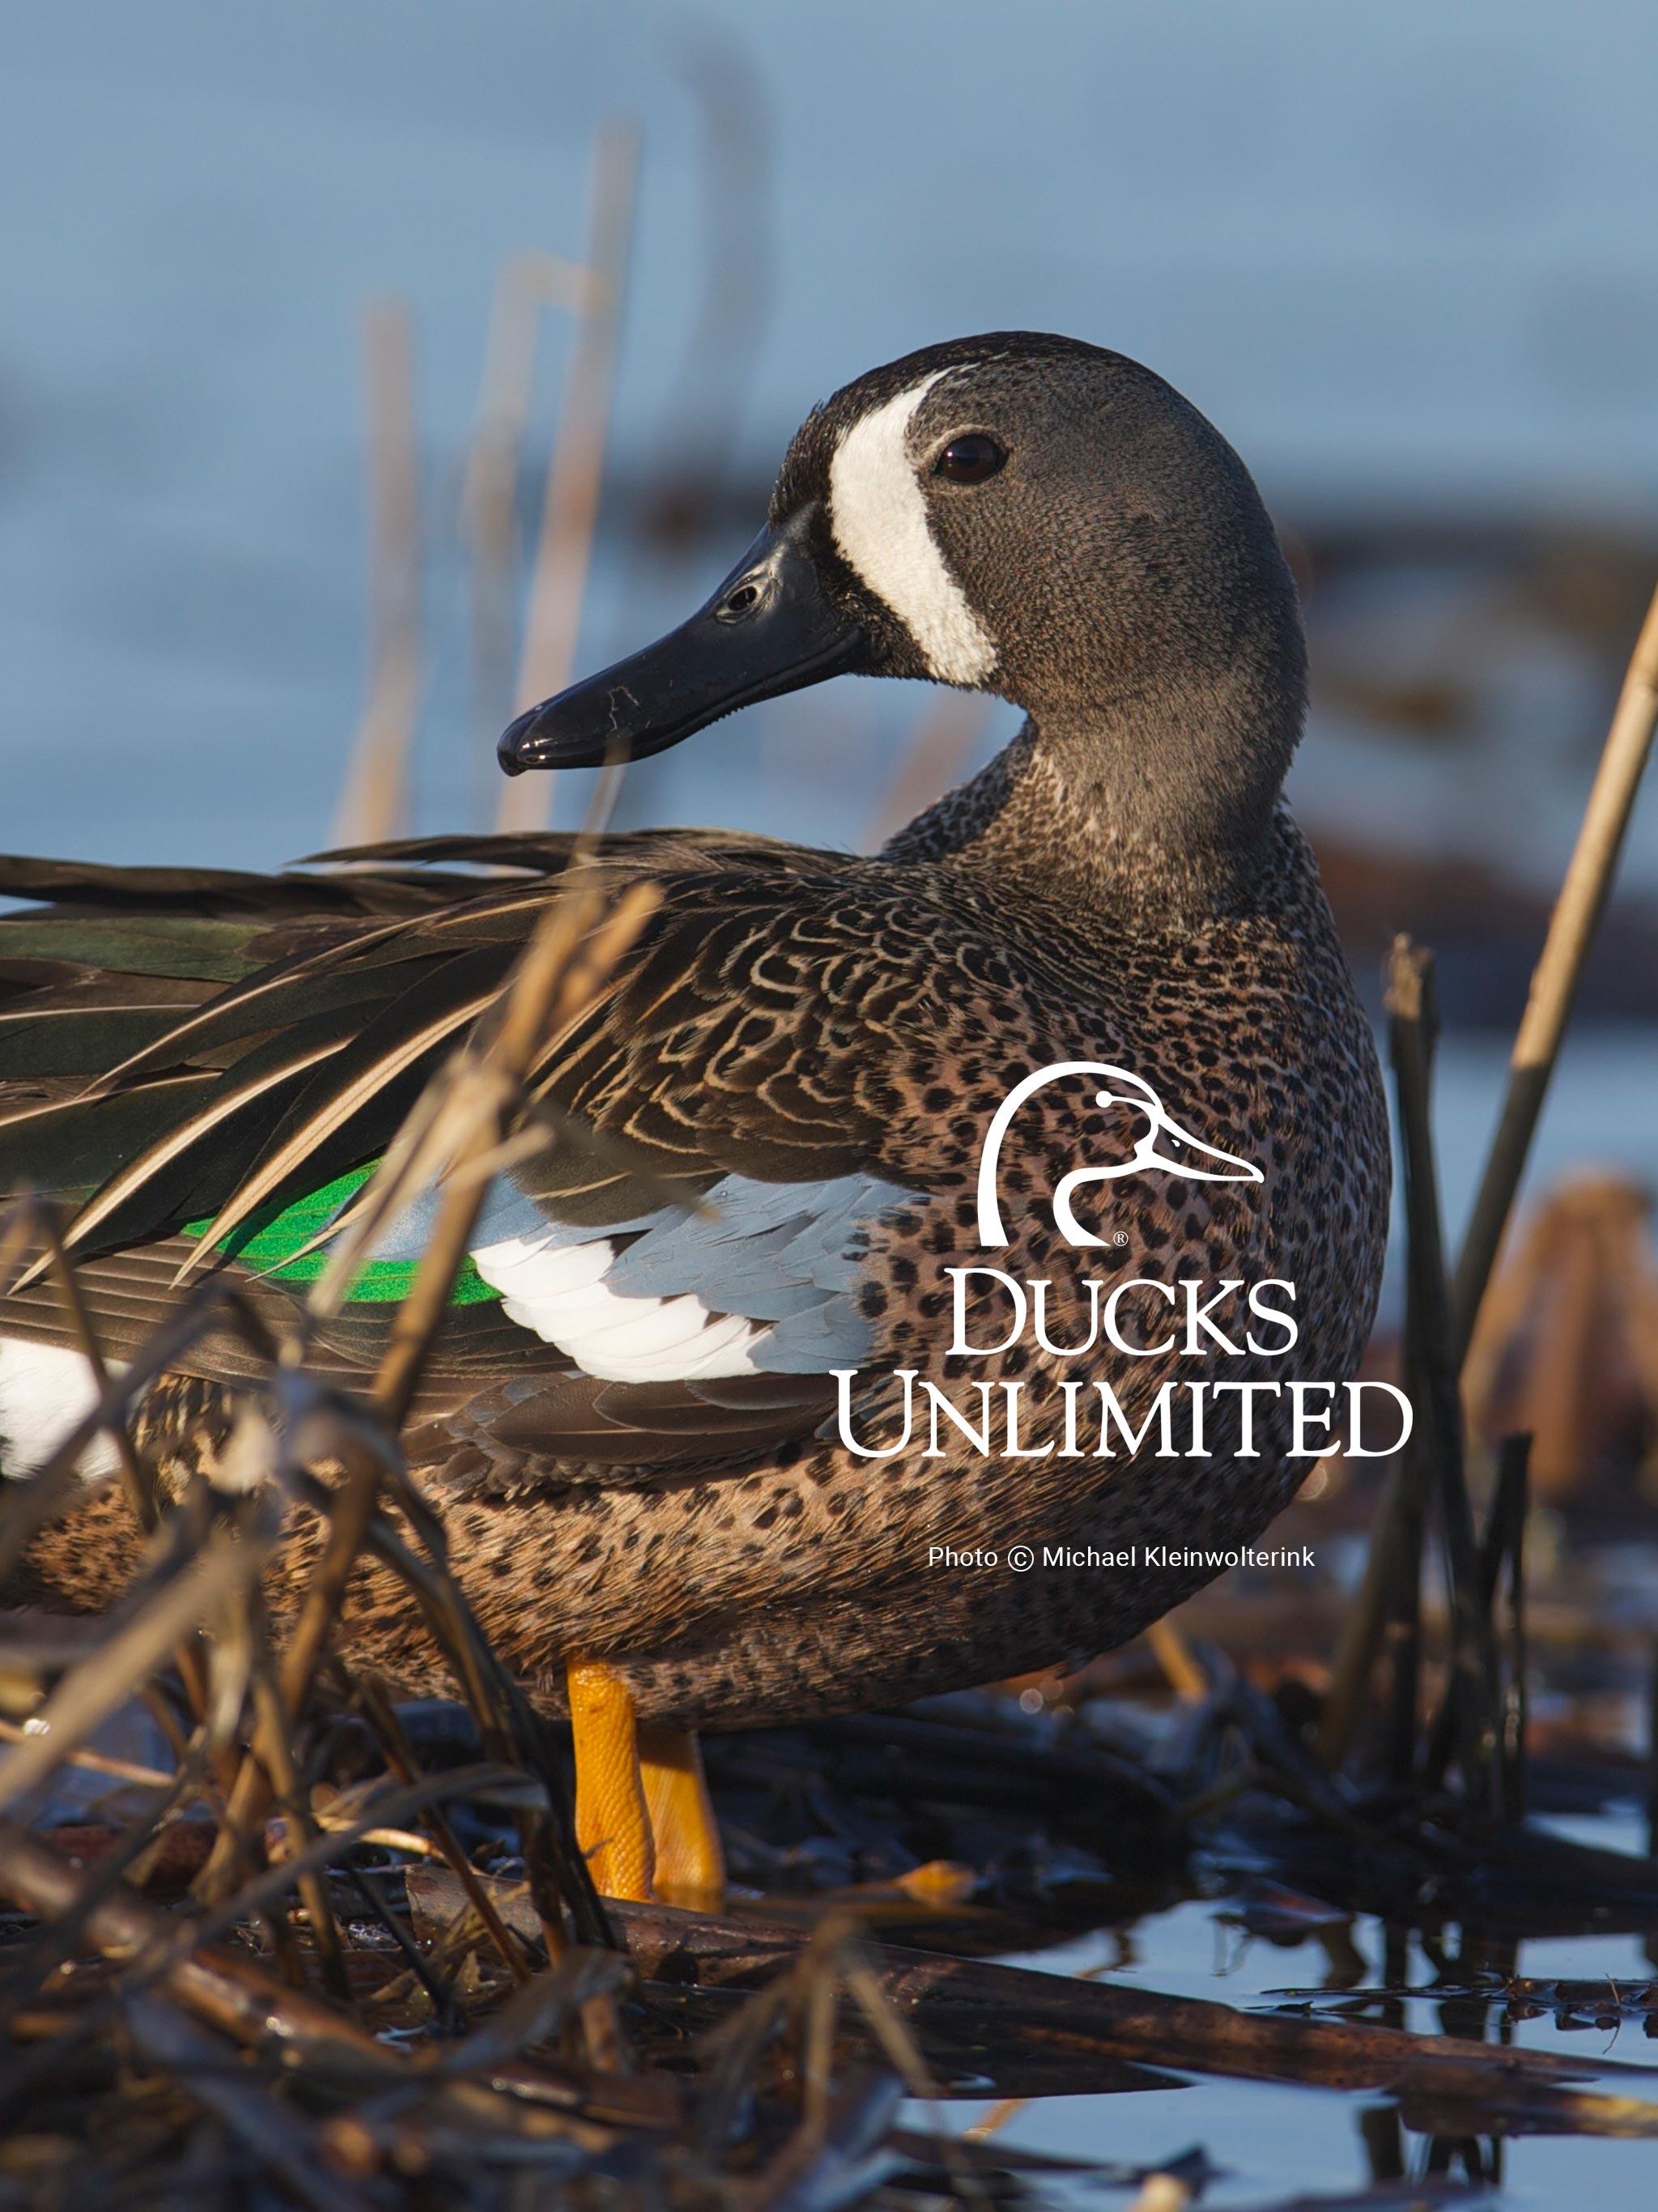 36 Duck Hunting Wallpaper Iphone ideas  hunting wallpaper duck hunting  hunting